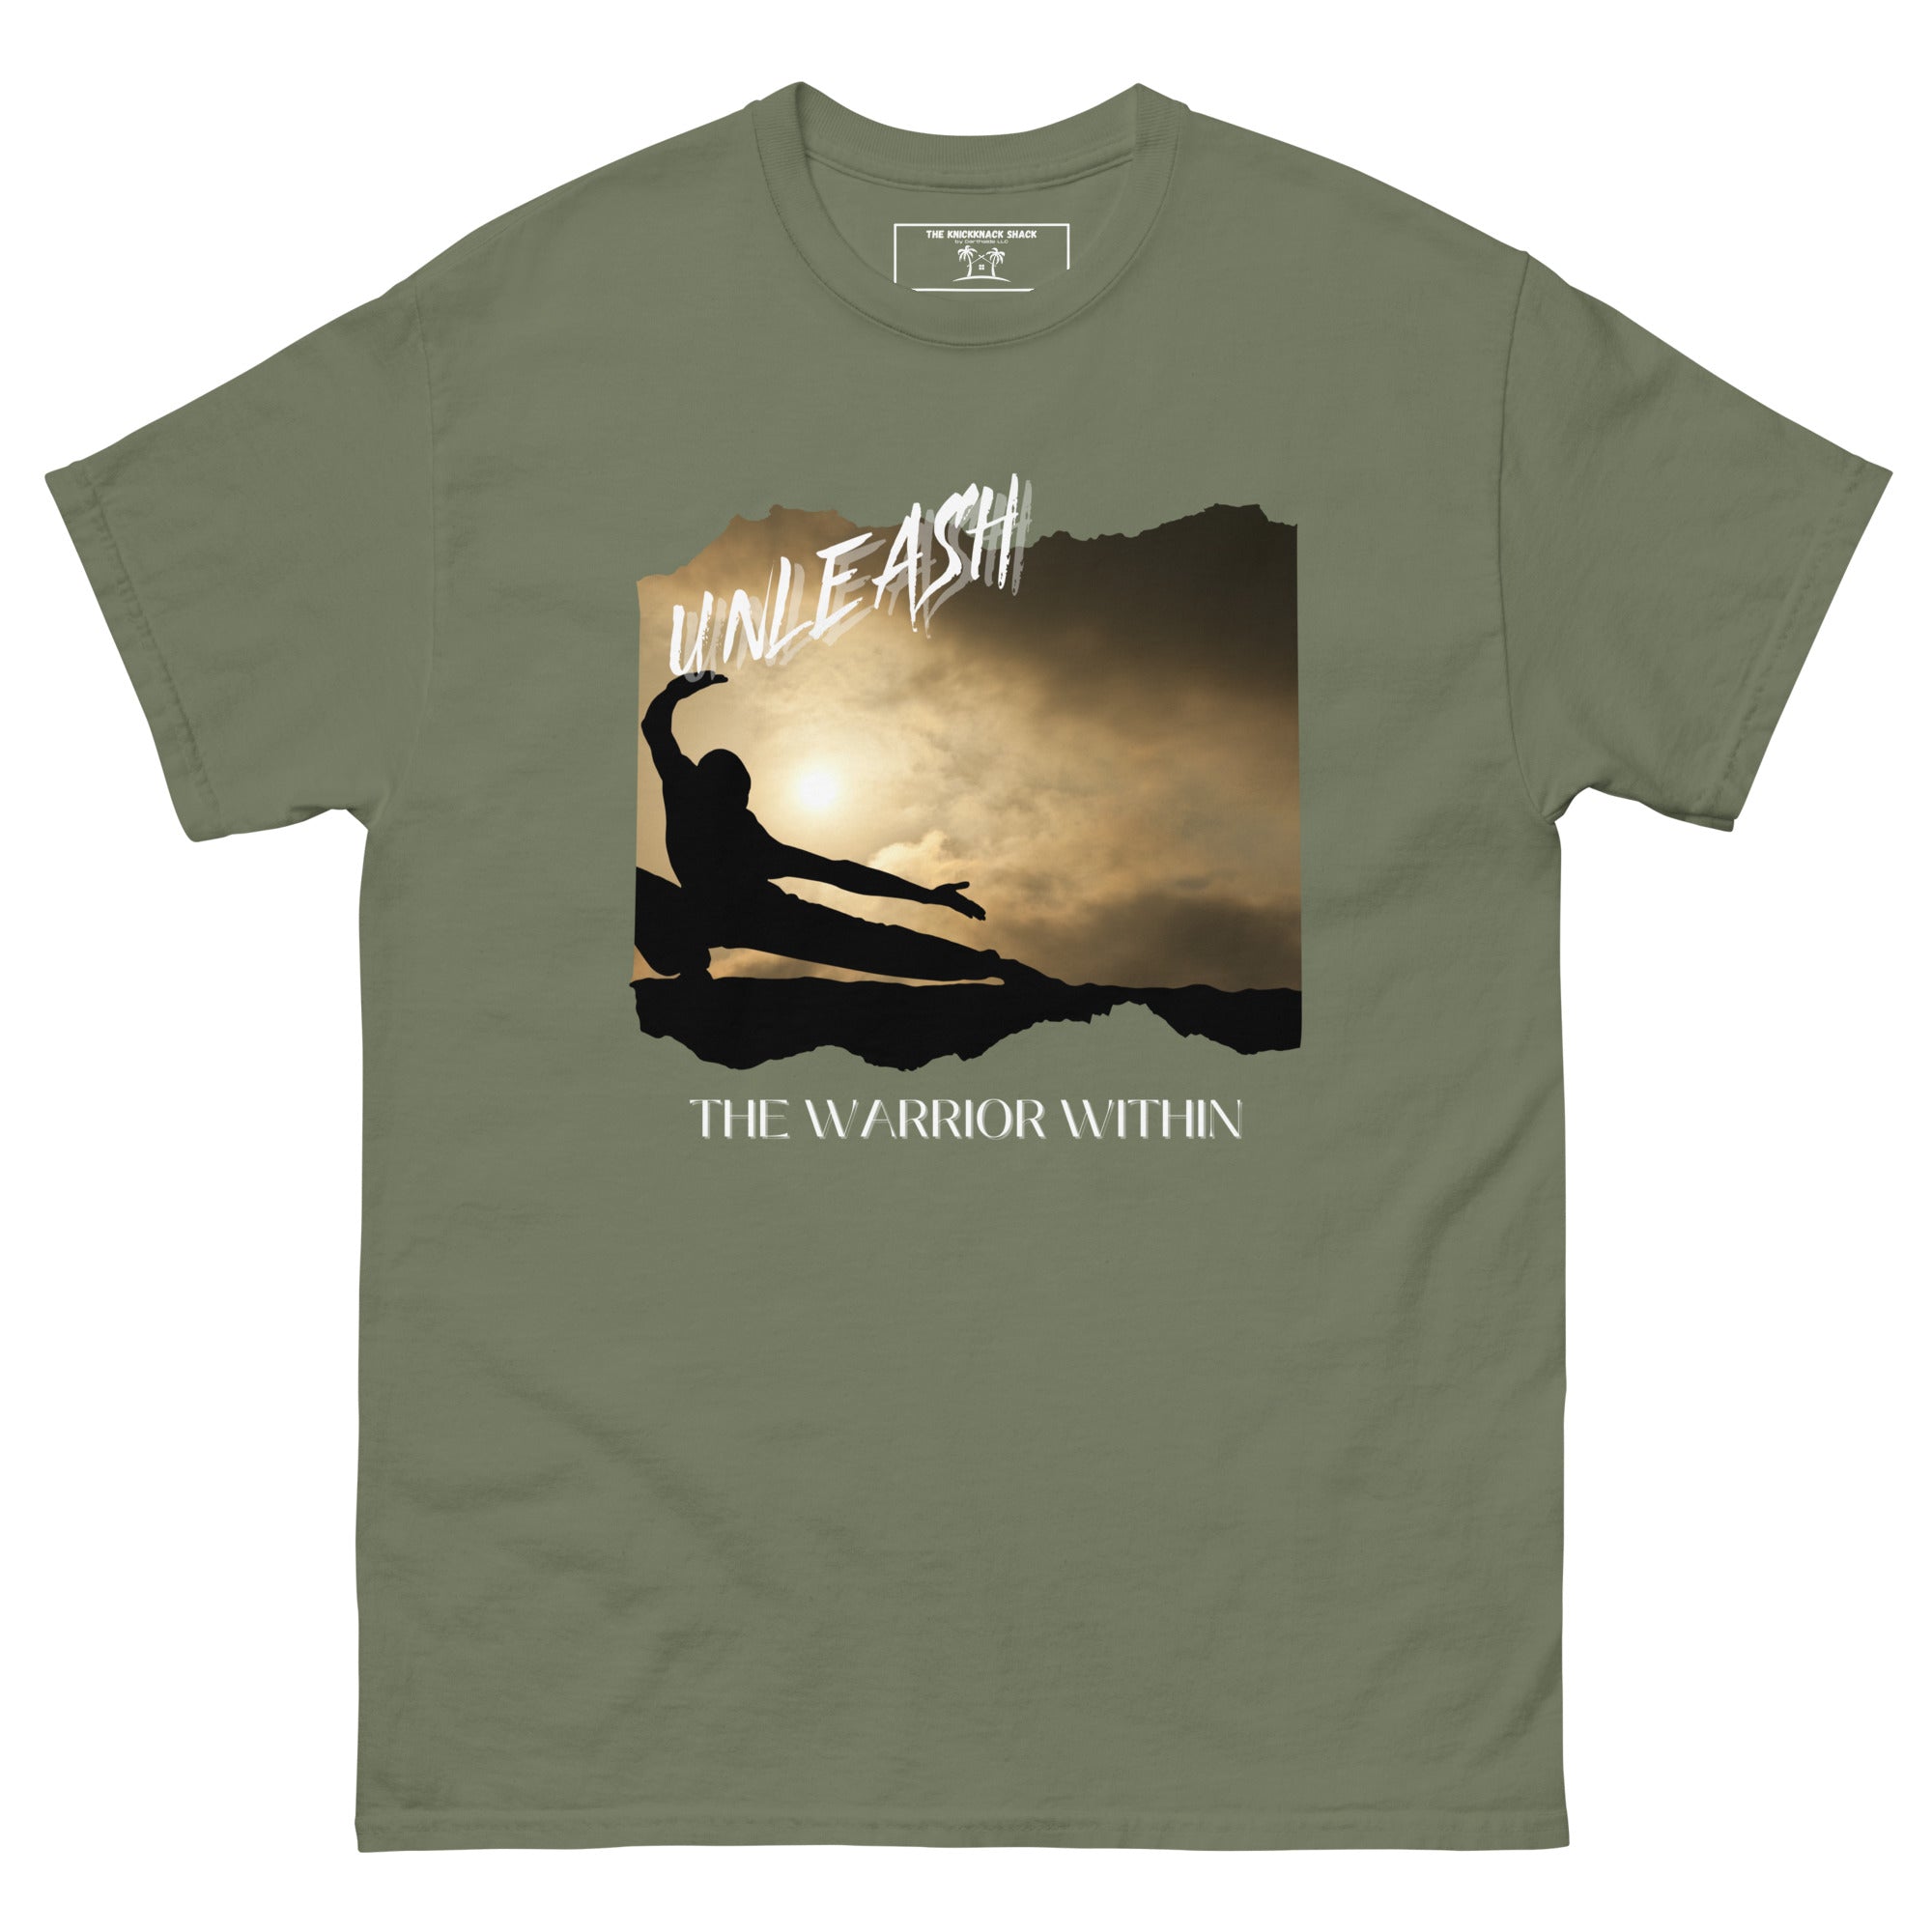 Tee-shirt classique - Warrior Within 4 (couleurs sombres)